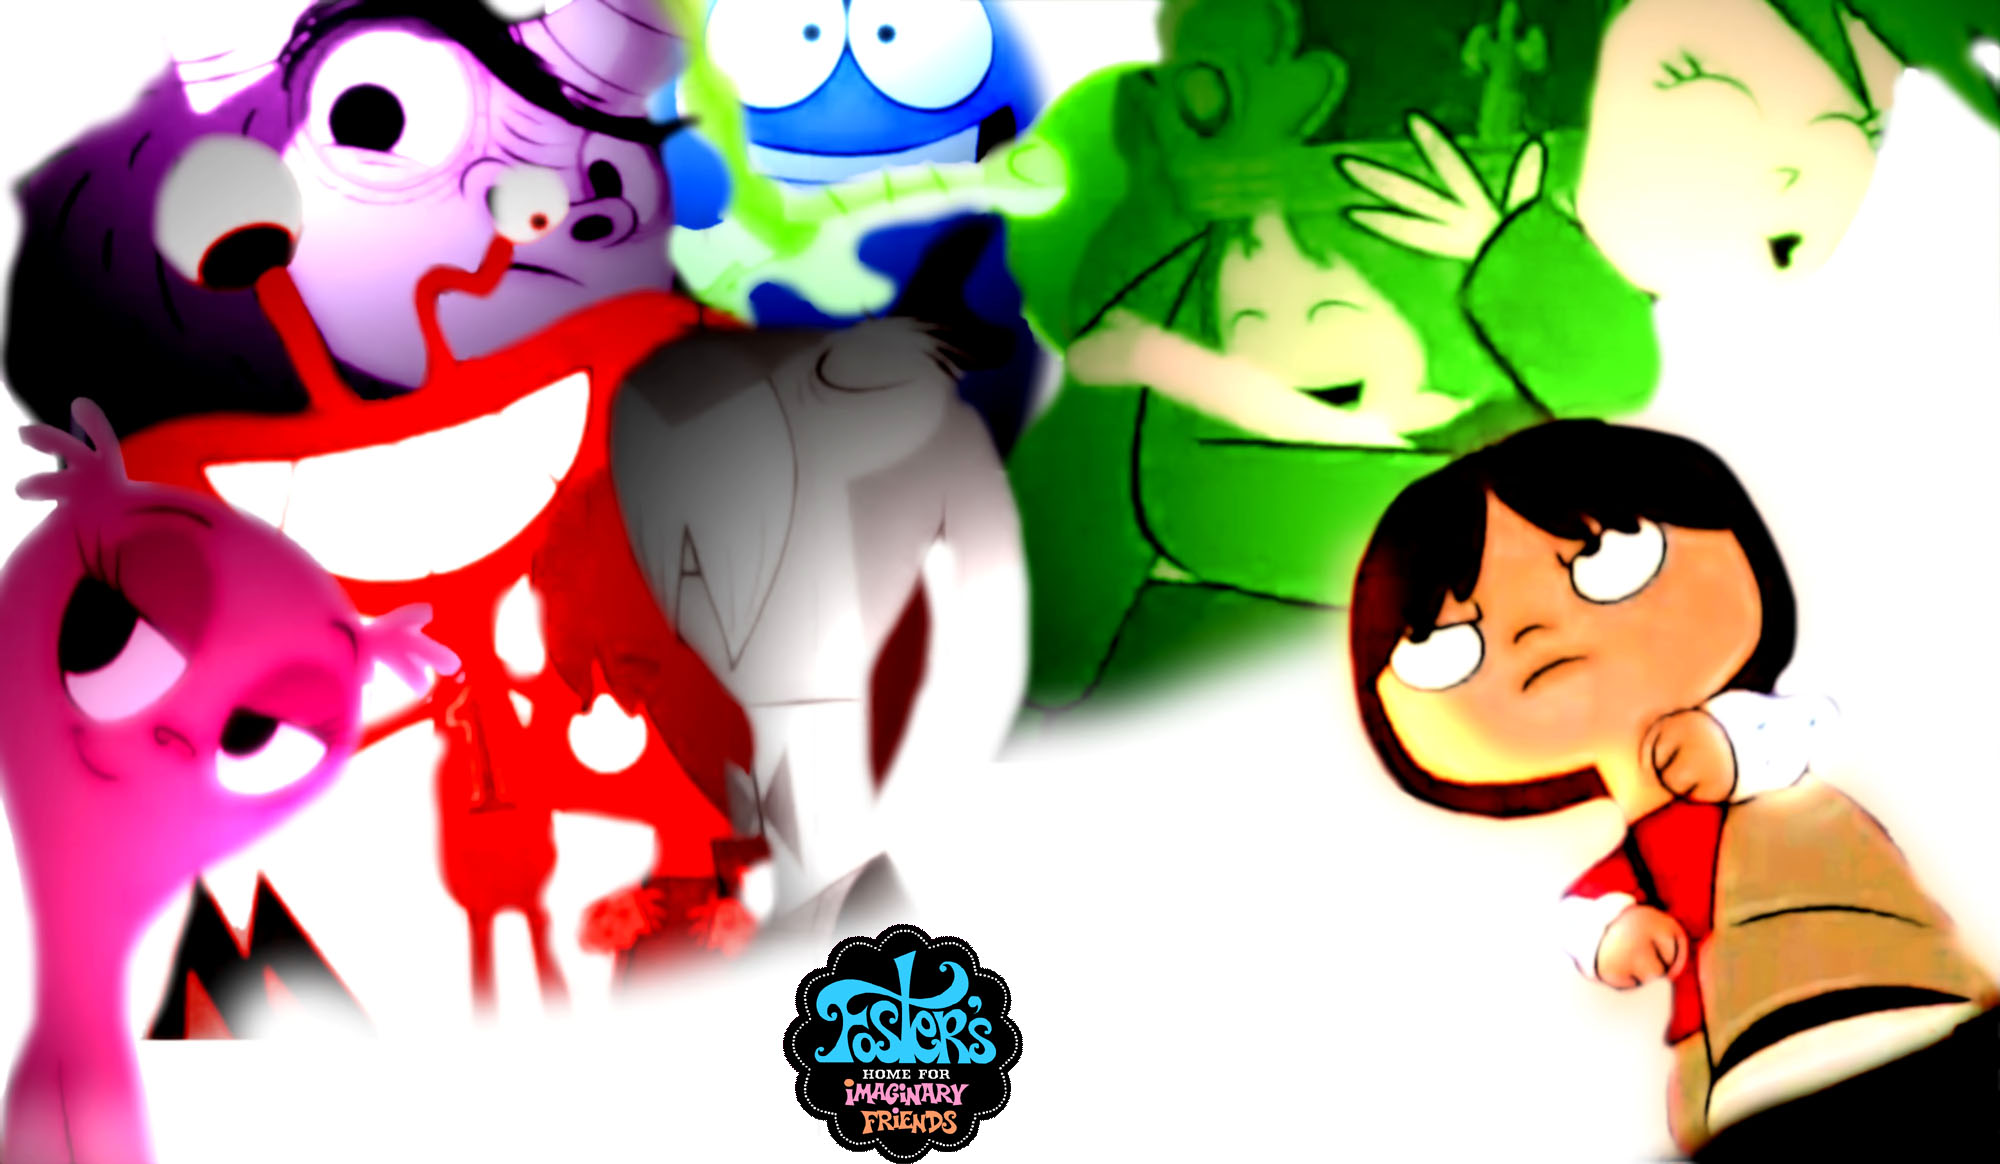 Foster S Home For Imaginary Friends Image Thecelebritypix